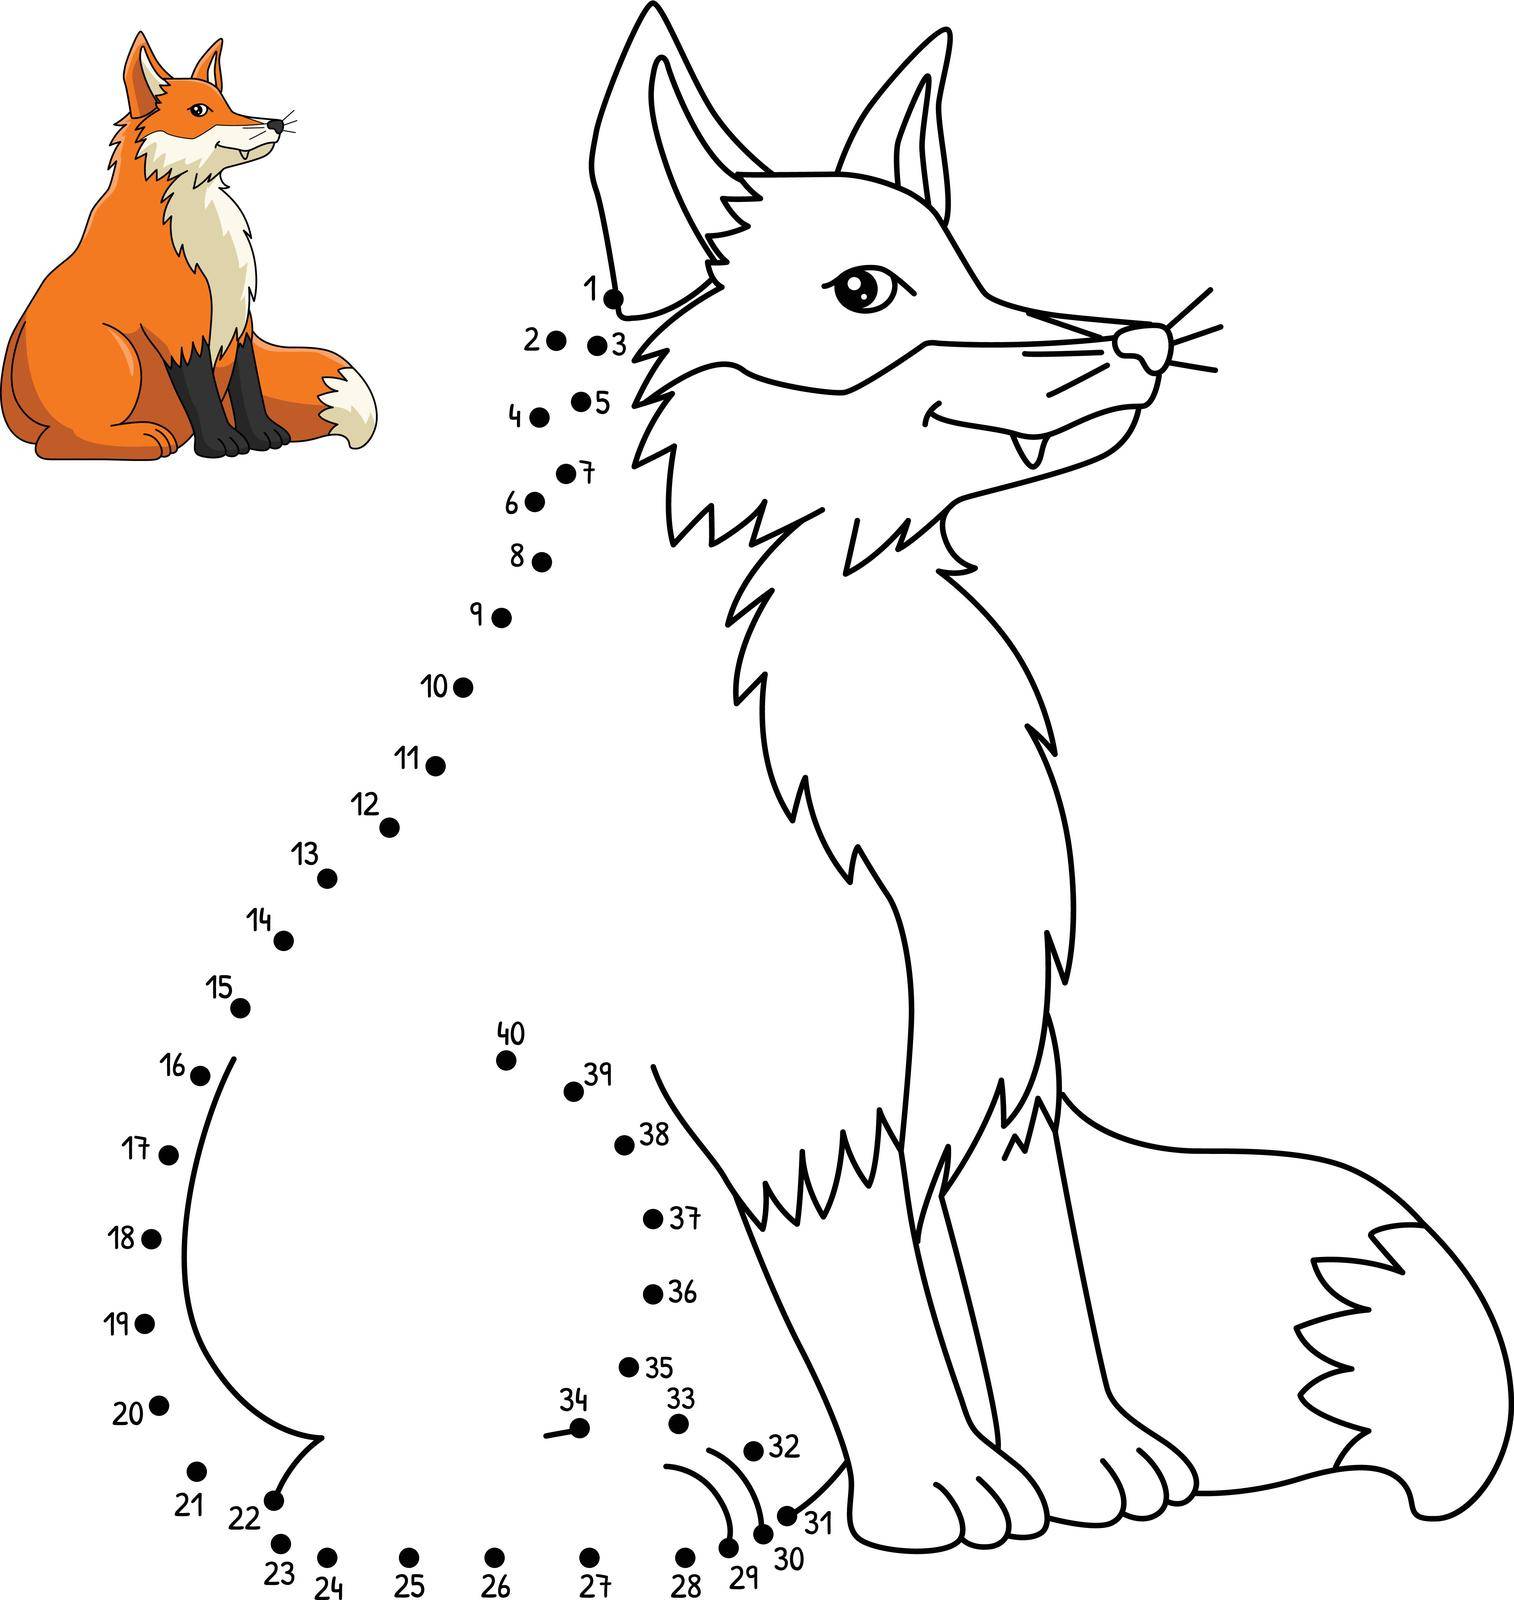 A cute and funny connect-the-dots coloring page of a Fox. Provides hours of coloring fun for children. Color, this page is very easy. Suitable for little kids and toddlers.